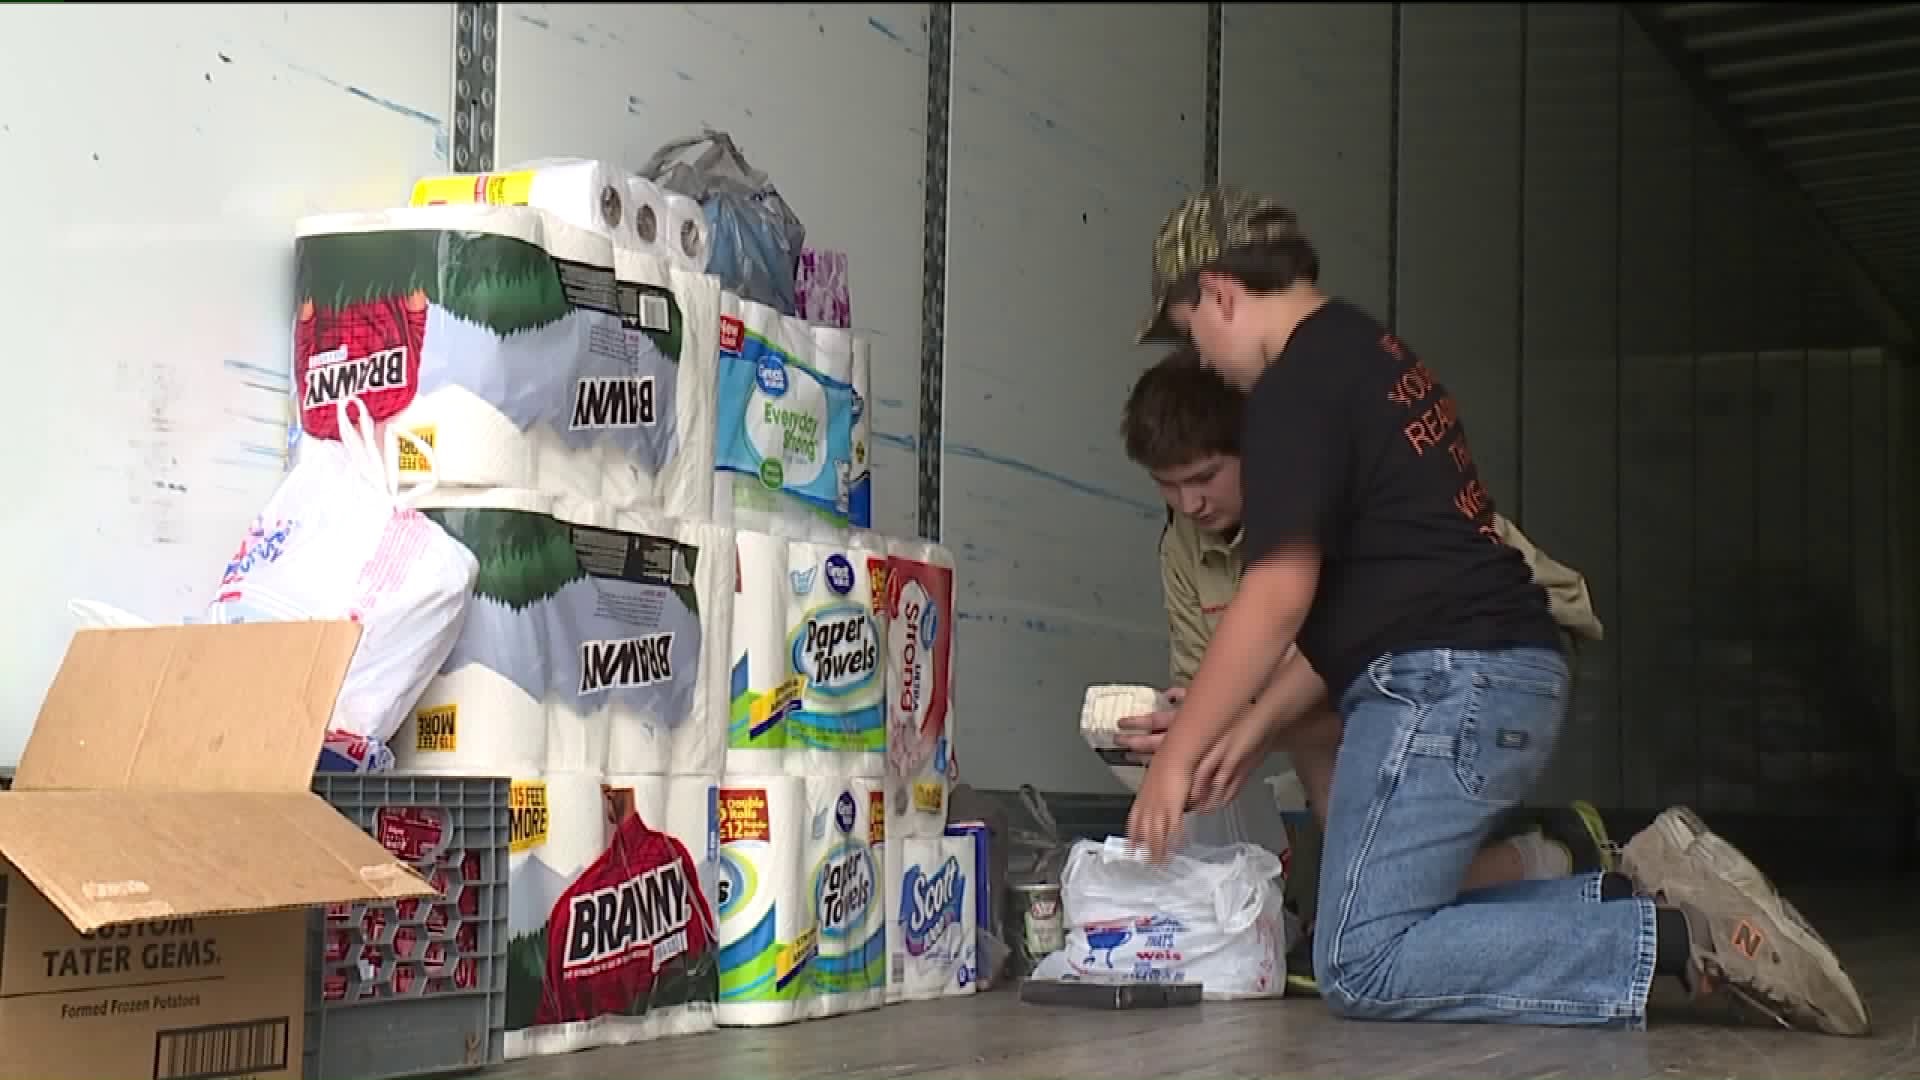 Tractor Trailers Full of Supplies Heading to Texas from Wyoming County